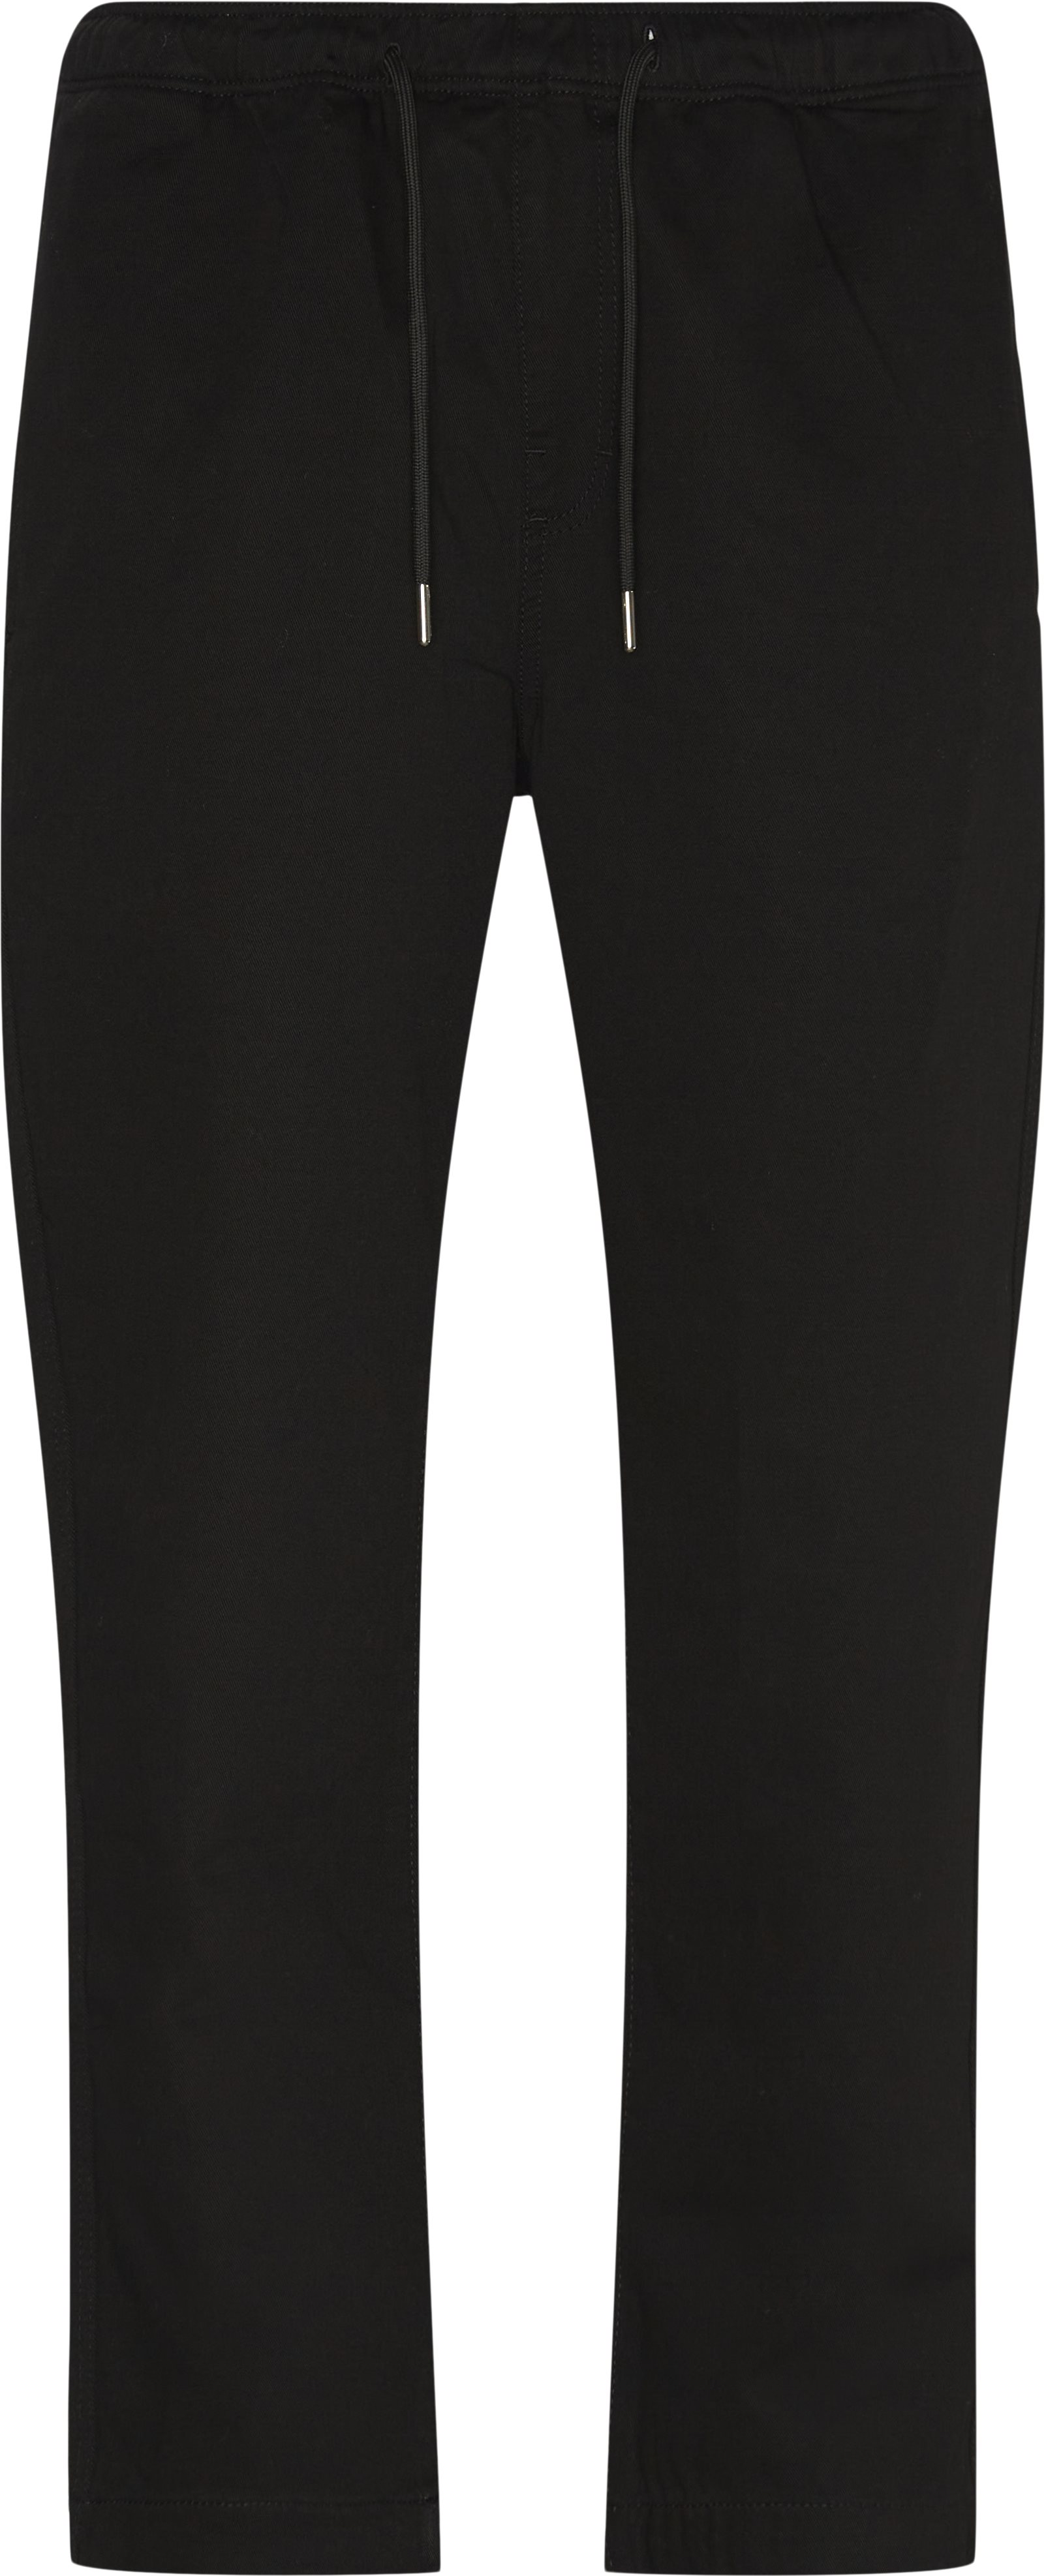 Johnson Pant - Trousers - Relaxed fit - Black